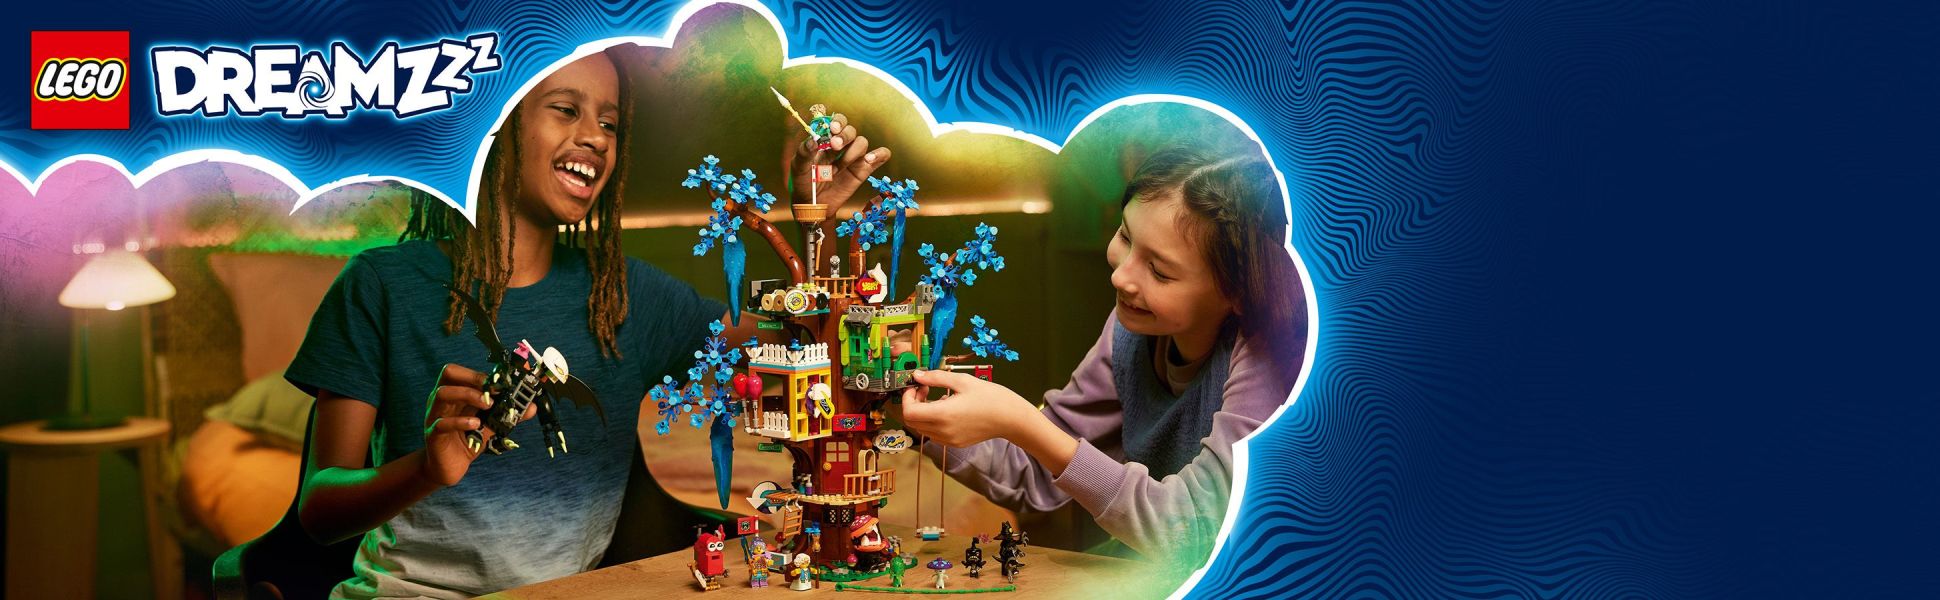 LEGO DREAMZzz Fantastical Tree House 71461 Features 3 Detailed Rooms,  Building Toy for Kids Ages 9+ with Big Imaginations, Includes Mrs.  Castillo, Izzie, Mateo and the Night Hunter Minifigures 